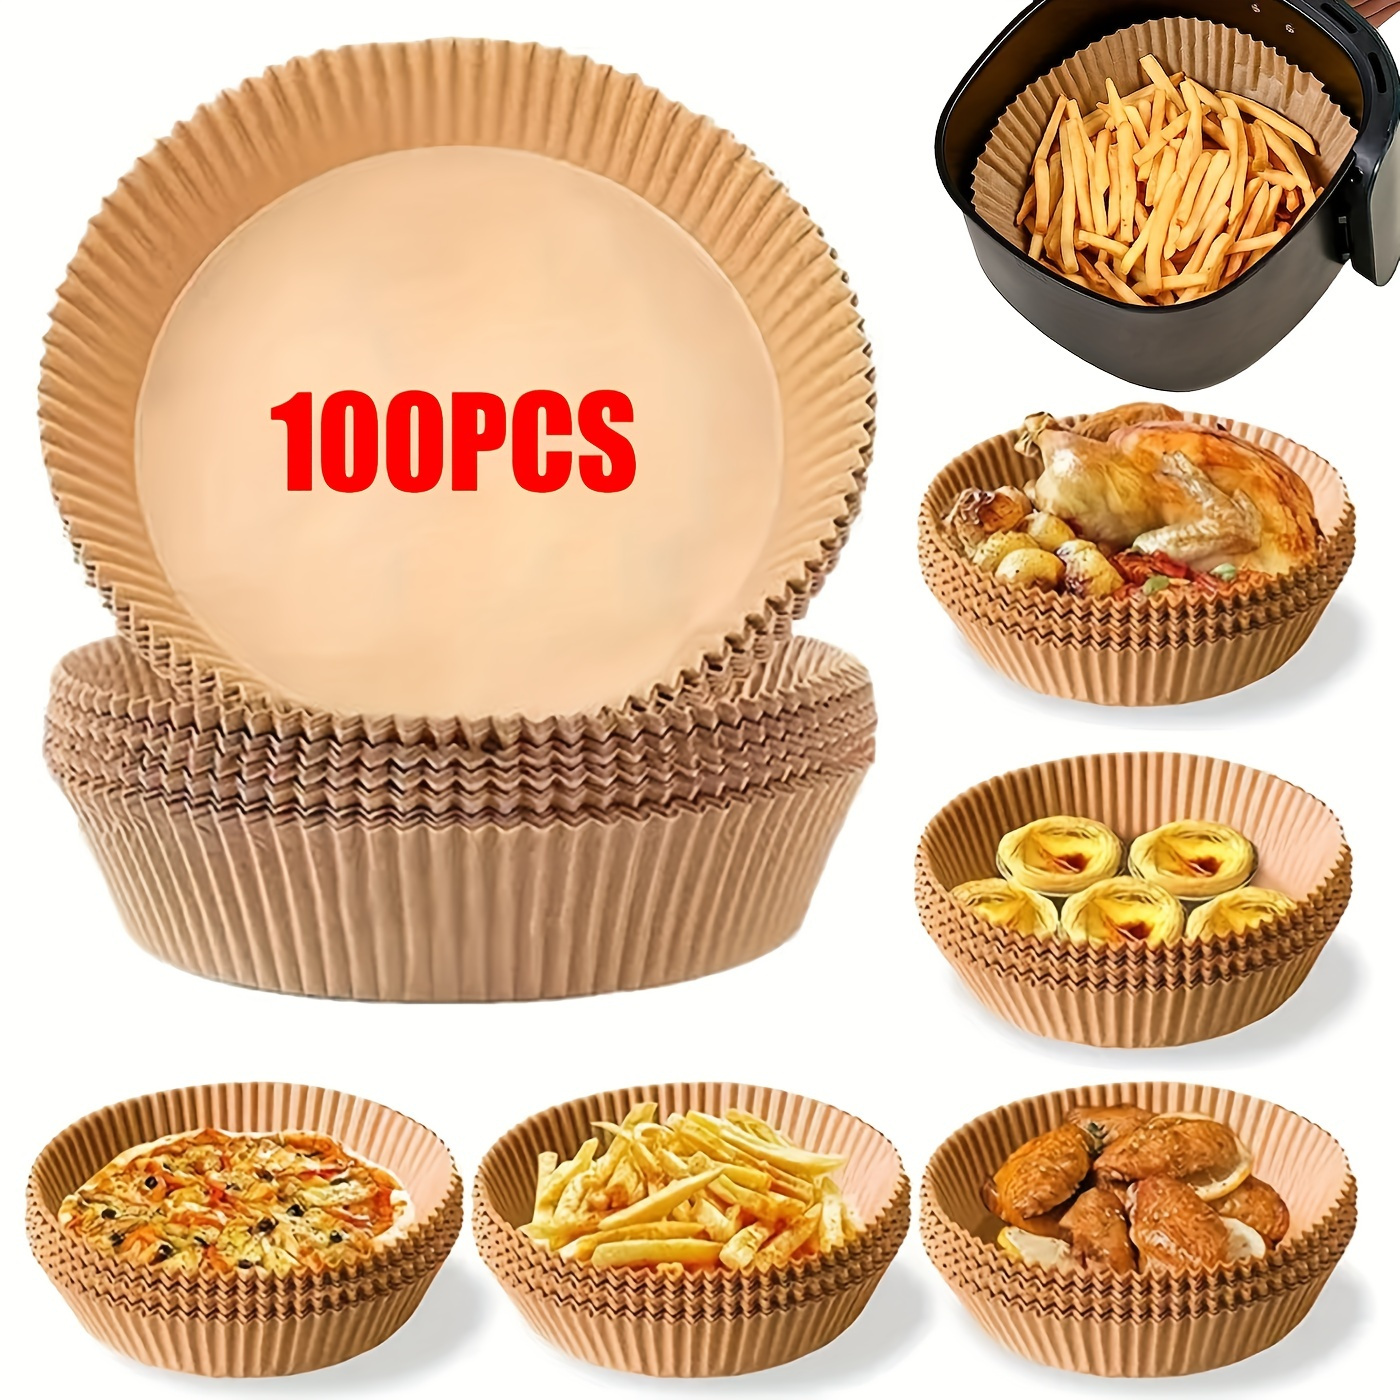 

100pcs Non-stick Air Fryer Liners - 7.9 Inch Round, Disposable, Unbleached, Oil-proof Parchment Paper For 5-8 Qt Baskets - Easy Clean-up And Healthier Cooking !